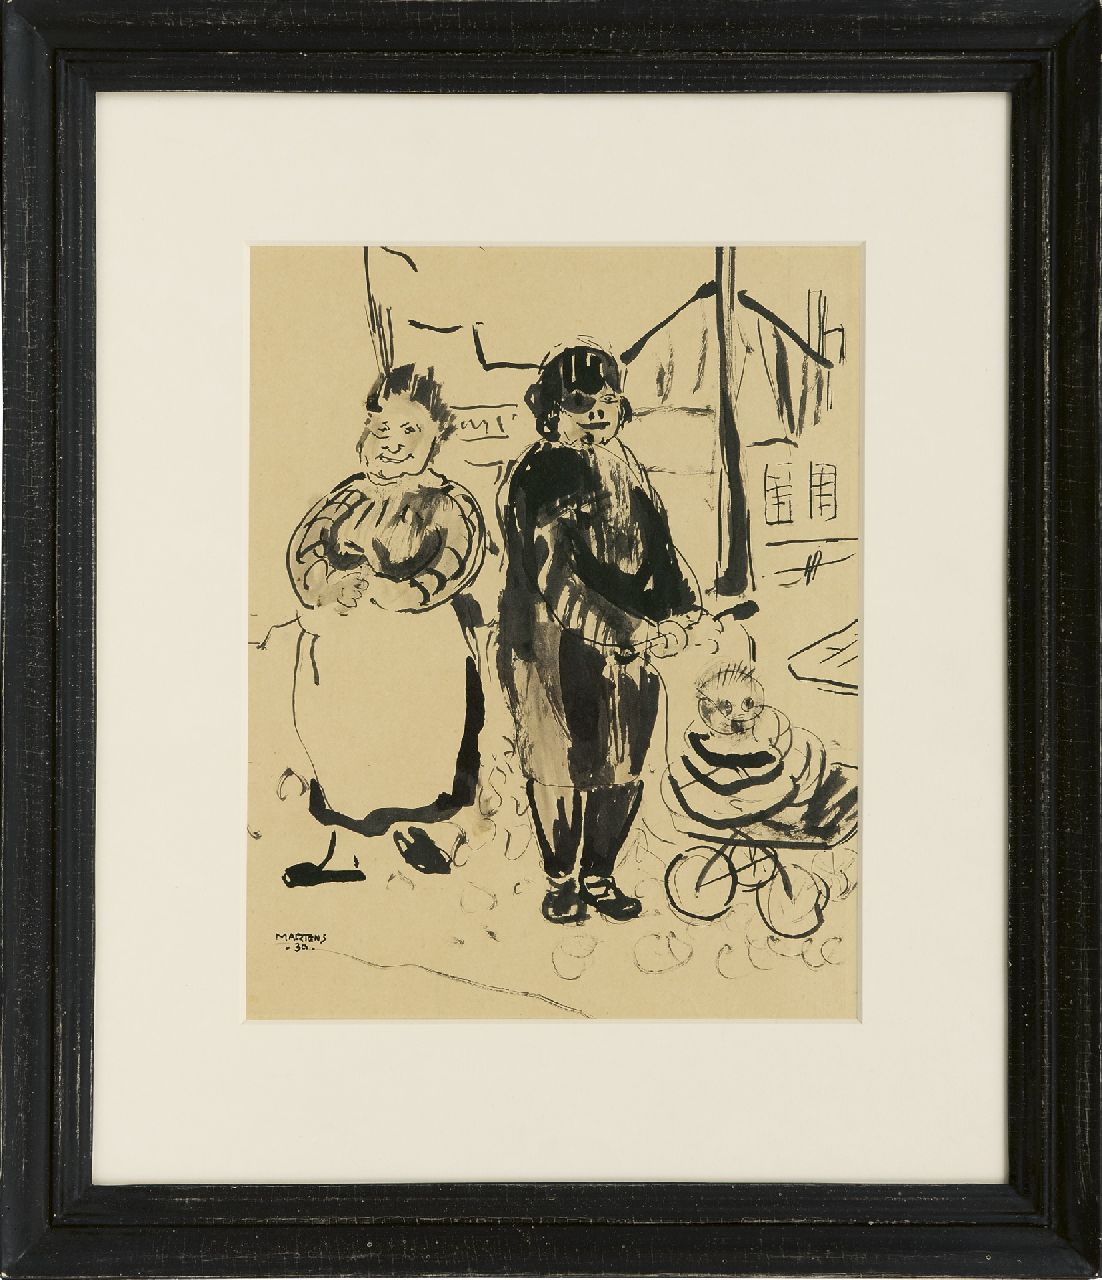 Martens G.G.  | Gijsbert 'George' Martens | Watercolours and drawings offered for sale | Two women and a pram, ink on paper 26.0 x 21.2 cm, signed l.l. and dated '34